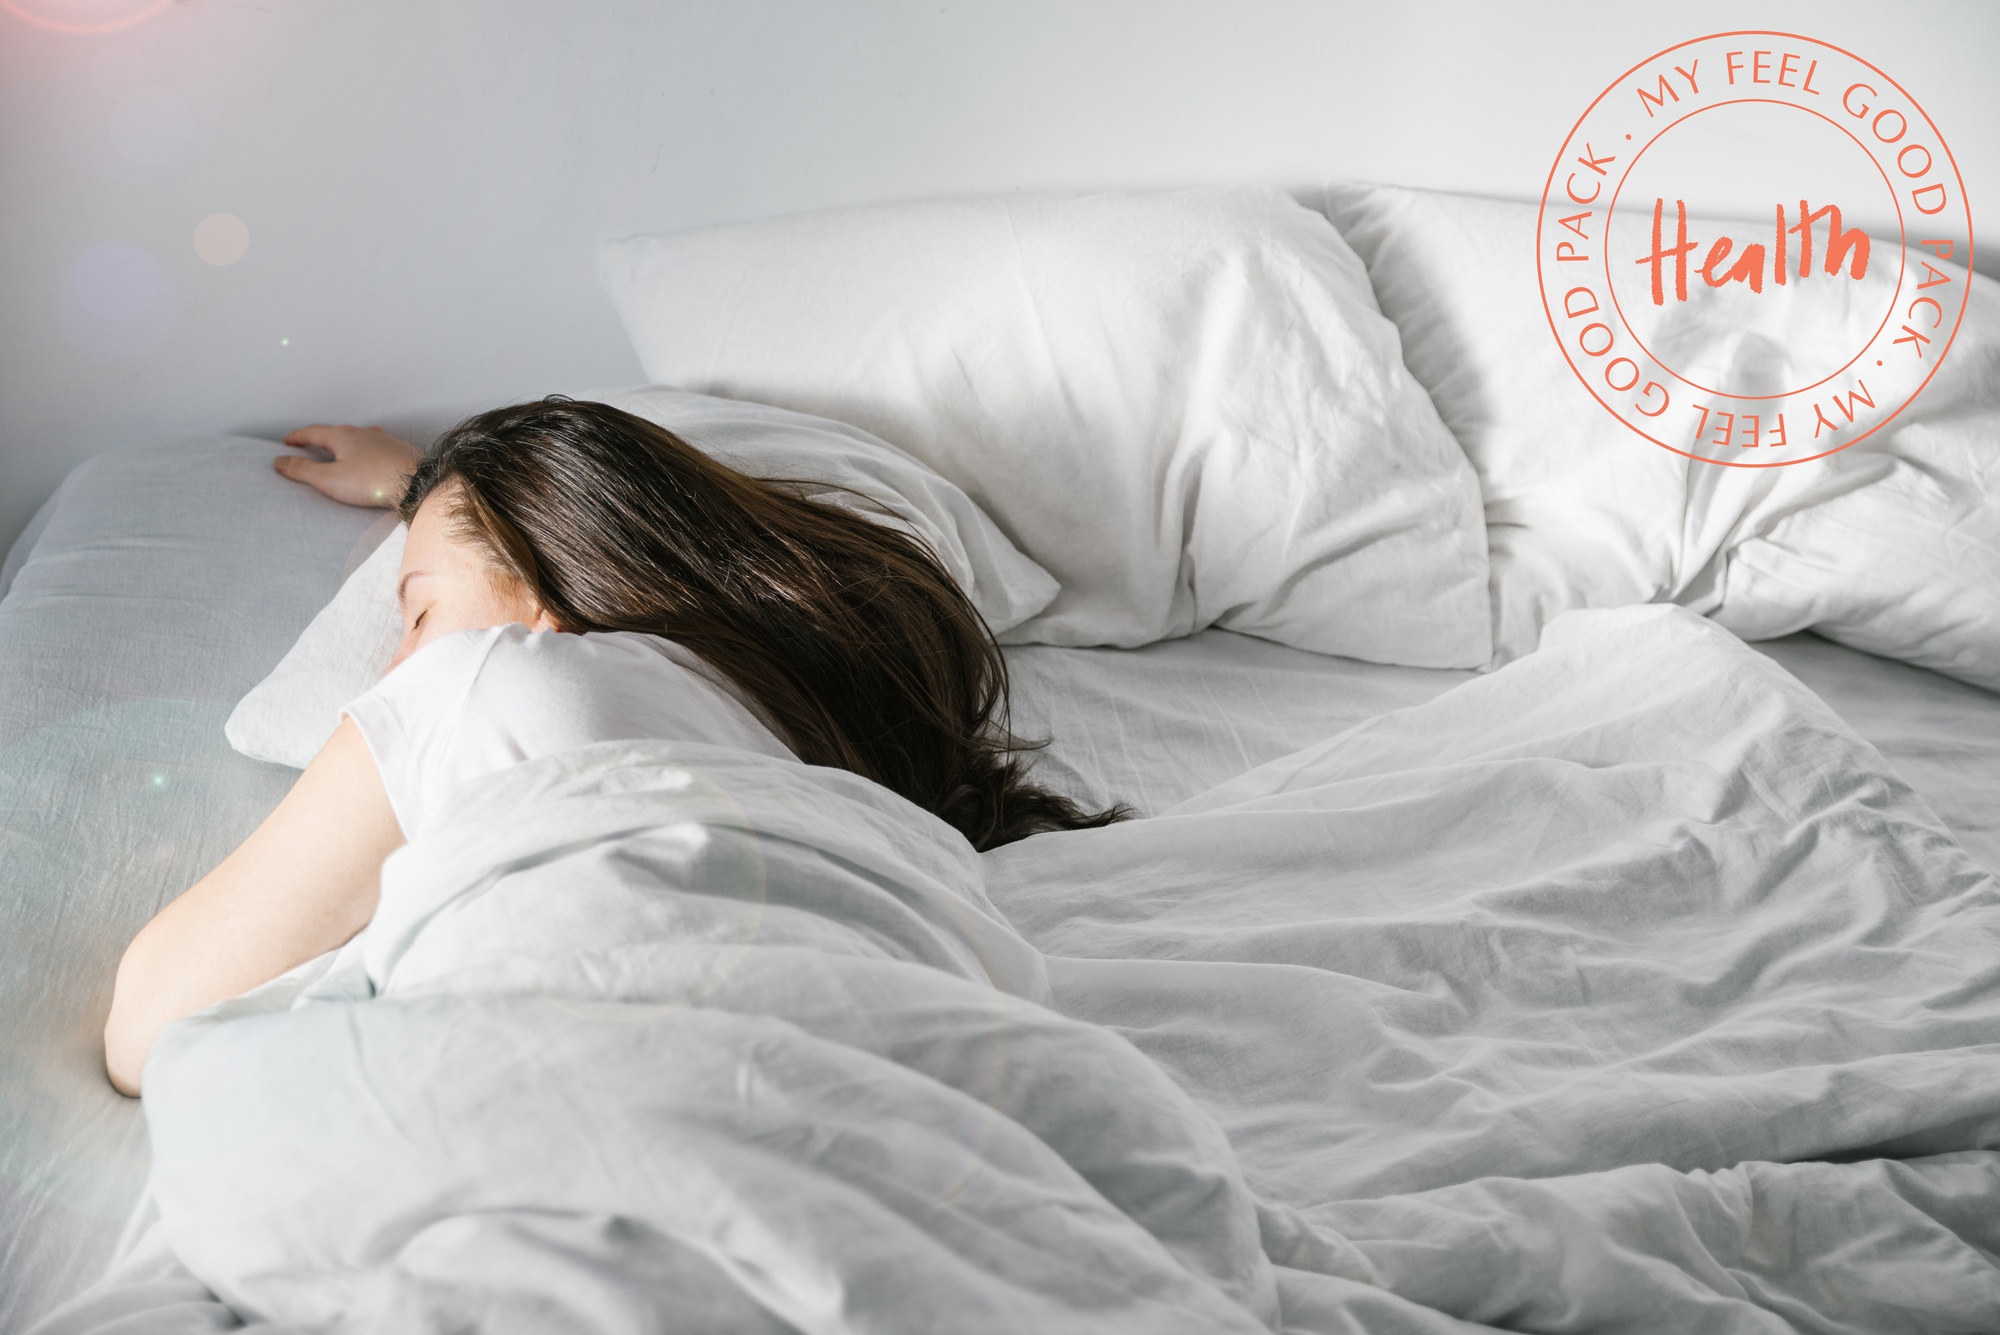 Why can’t I sleep? Top 8 tips to get more sleep